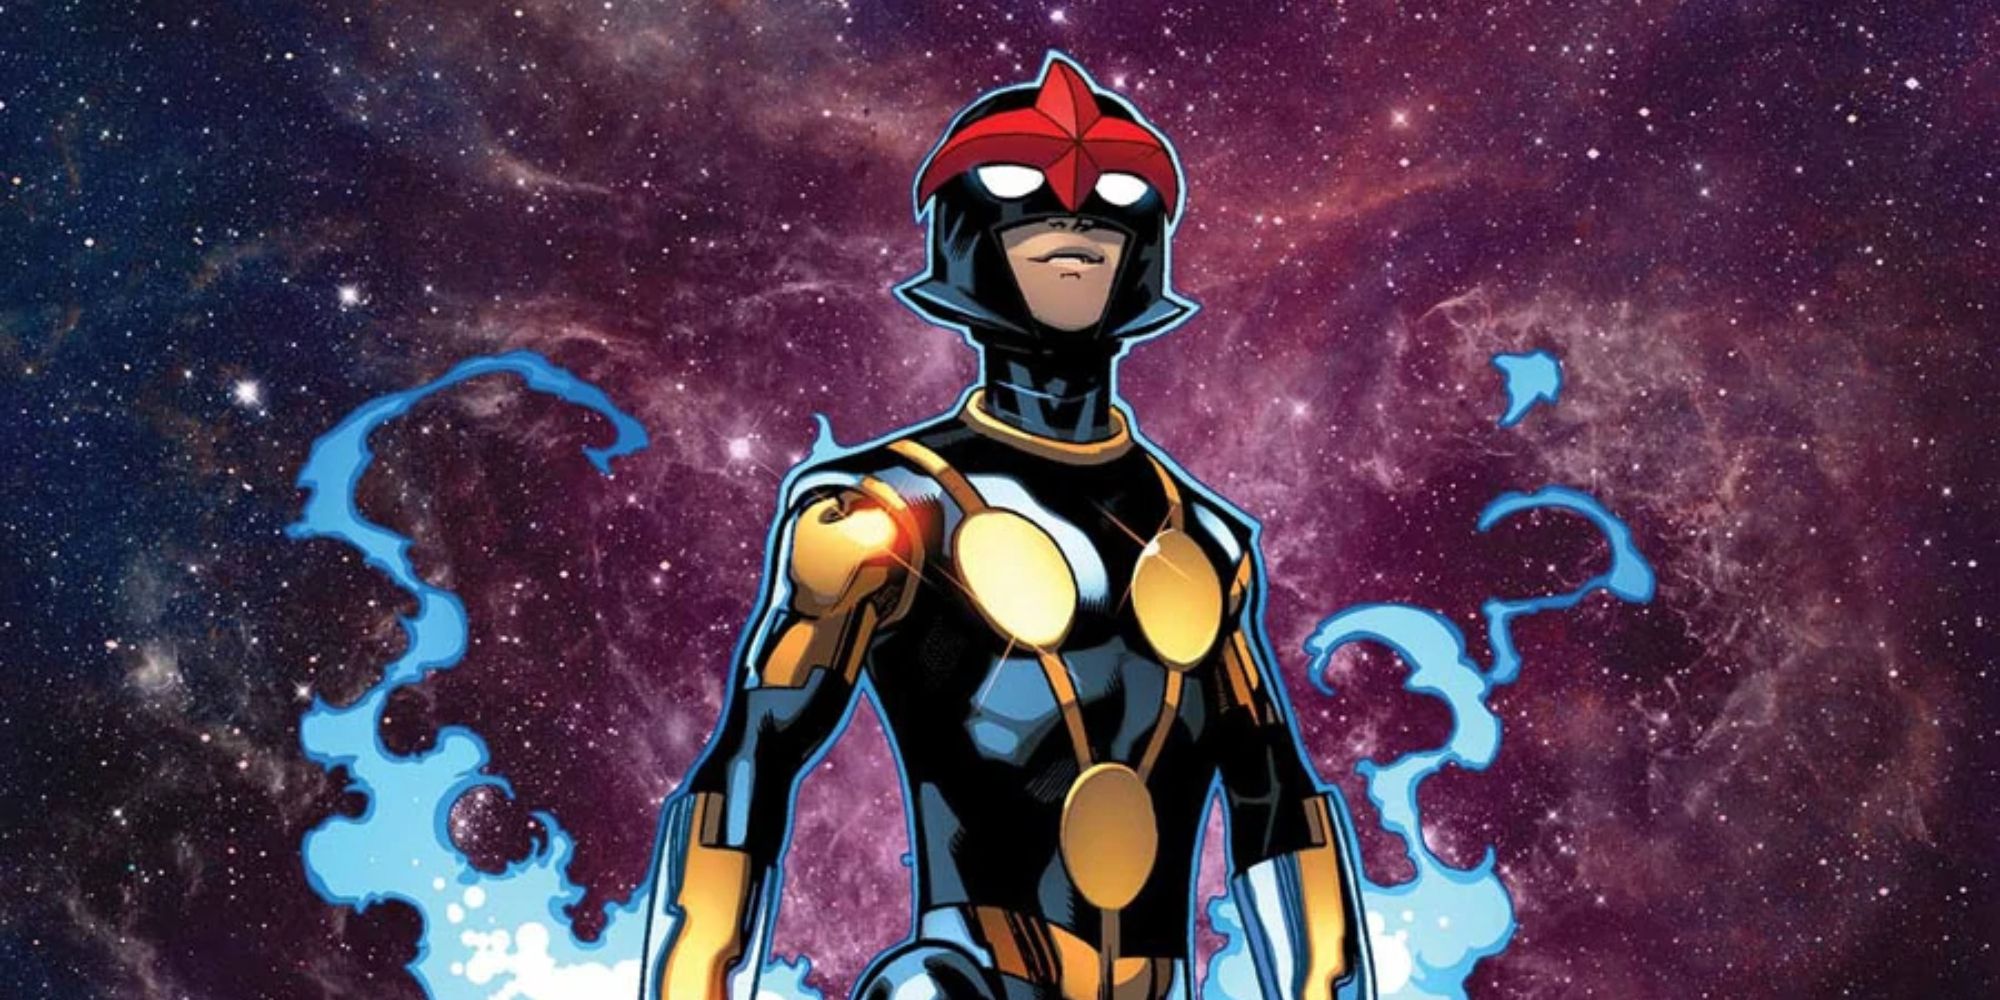 Nova standing out in the stars in the comics